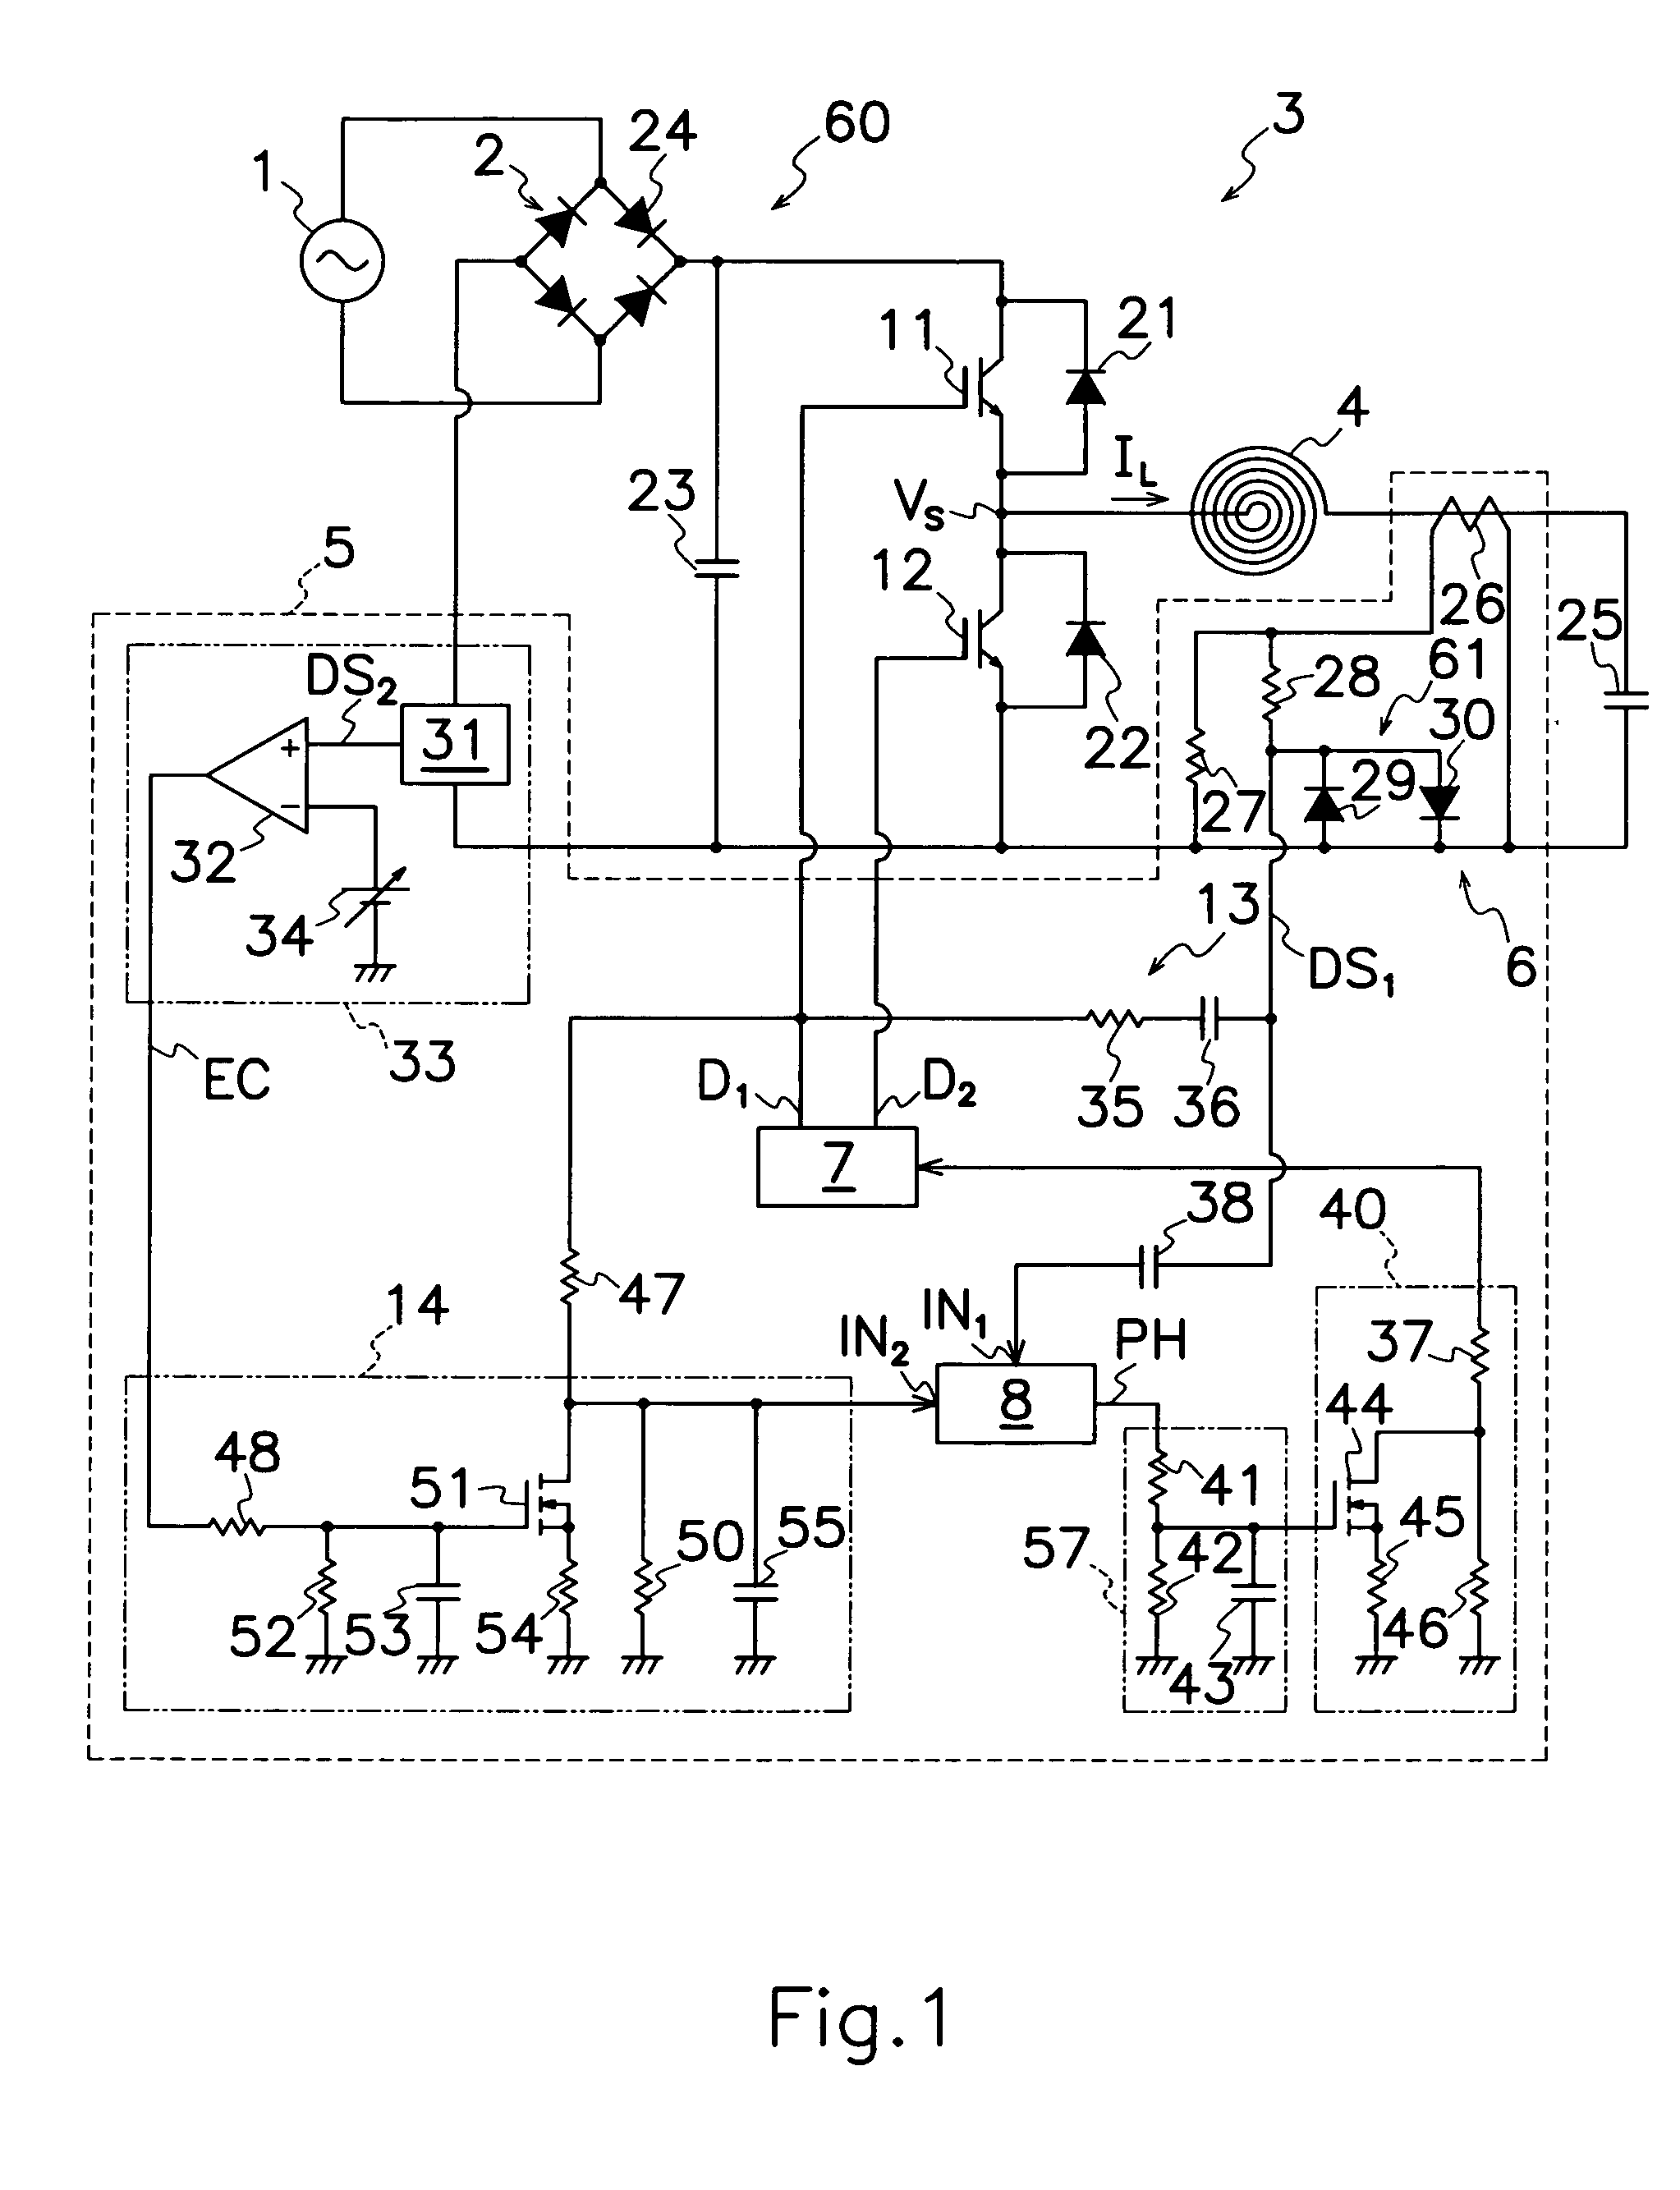 Induction heating apparatus capable of stably operating at least one switching element contained therein